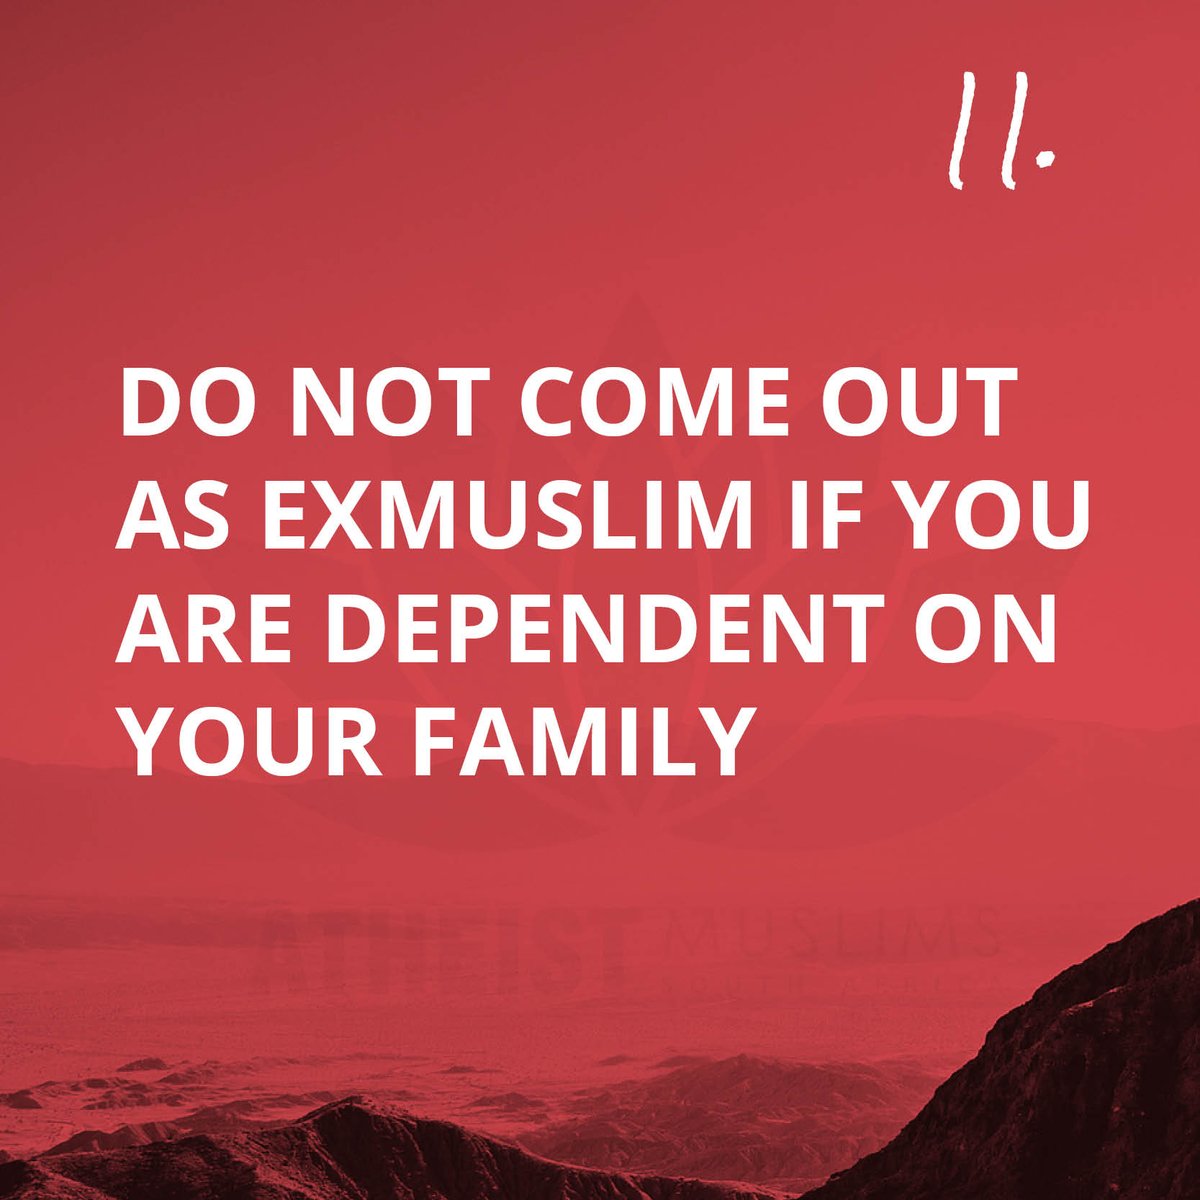 11) DO NOT come out as an exmuslim if you are still dependent on your family.Despite how difficult it might be, it’s important to remember that Ramadhan will end, you will once again have your normal routine back. Outing yourself could have a real impact on your future.